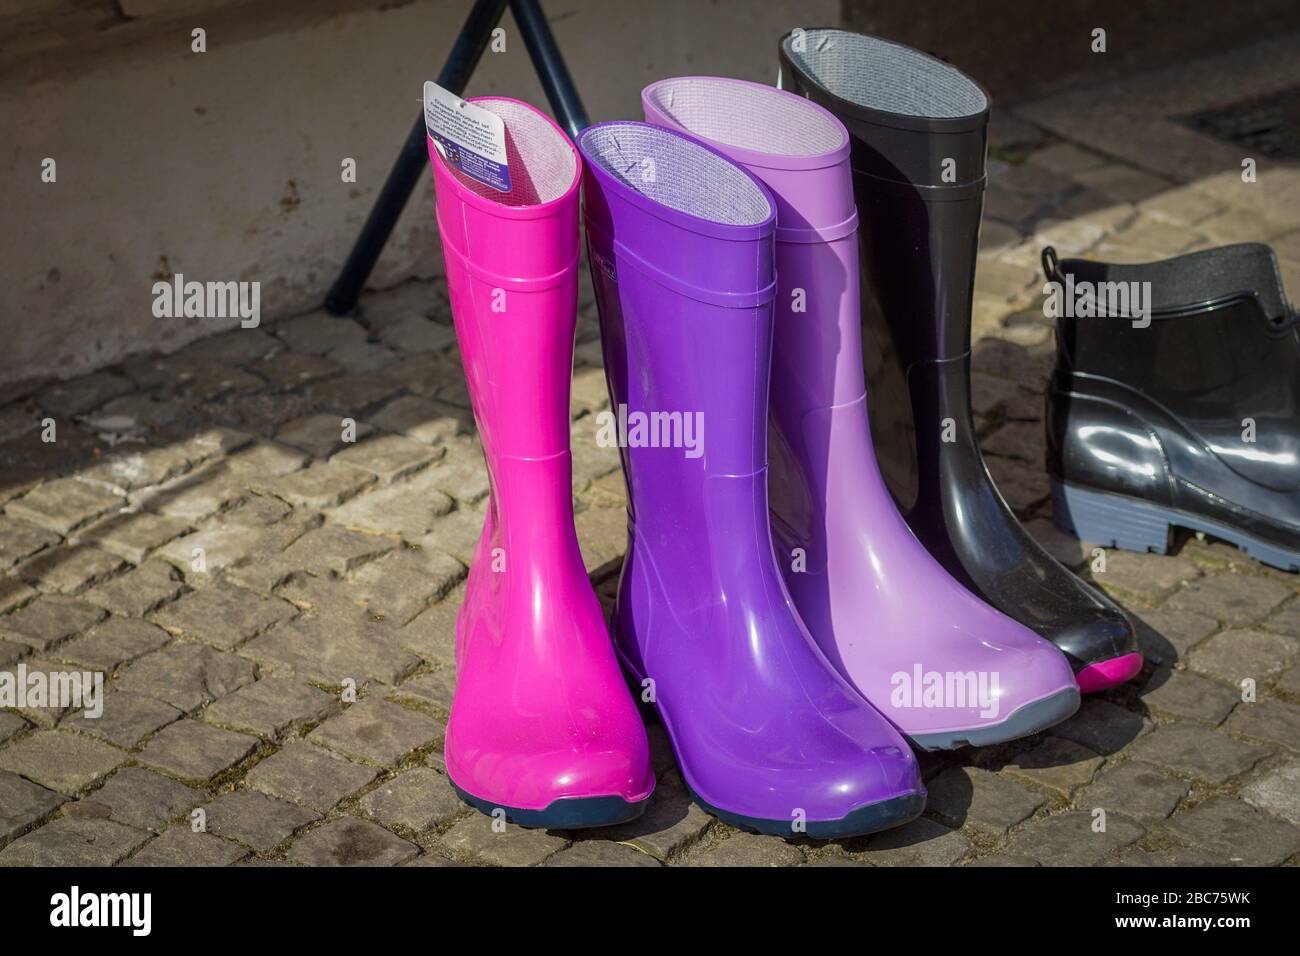 Five colorful pairs of rubber boots in pink, purple, violet and black Stock Photo